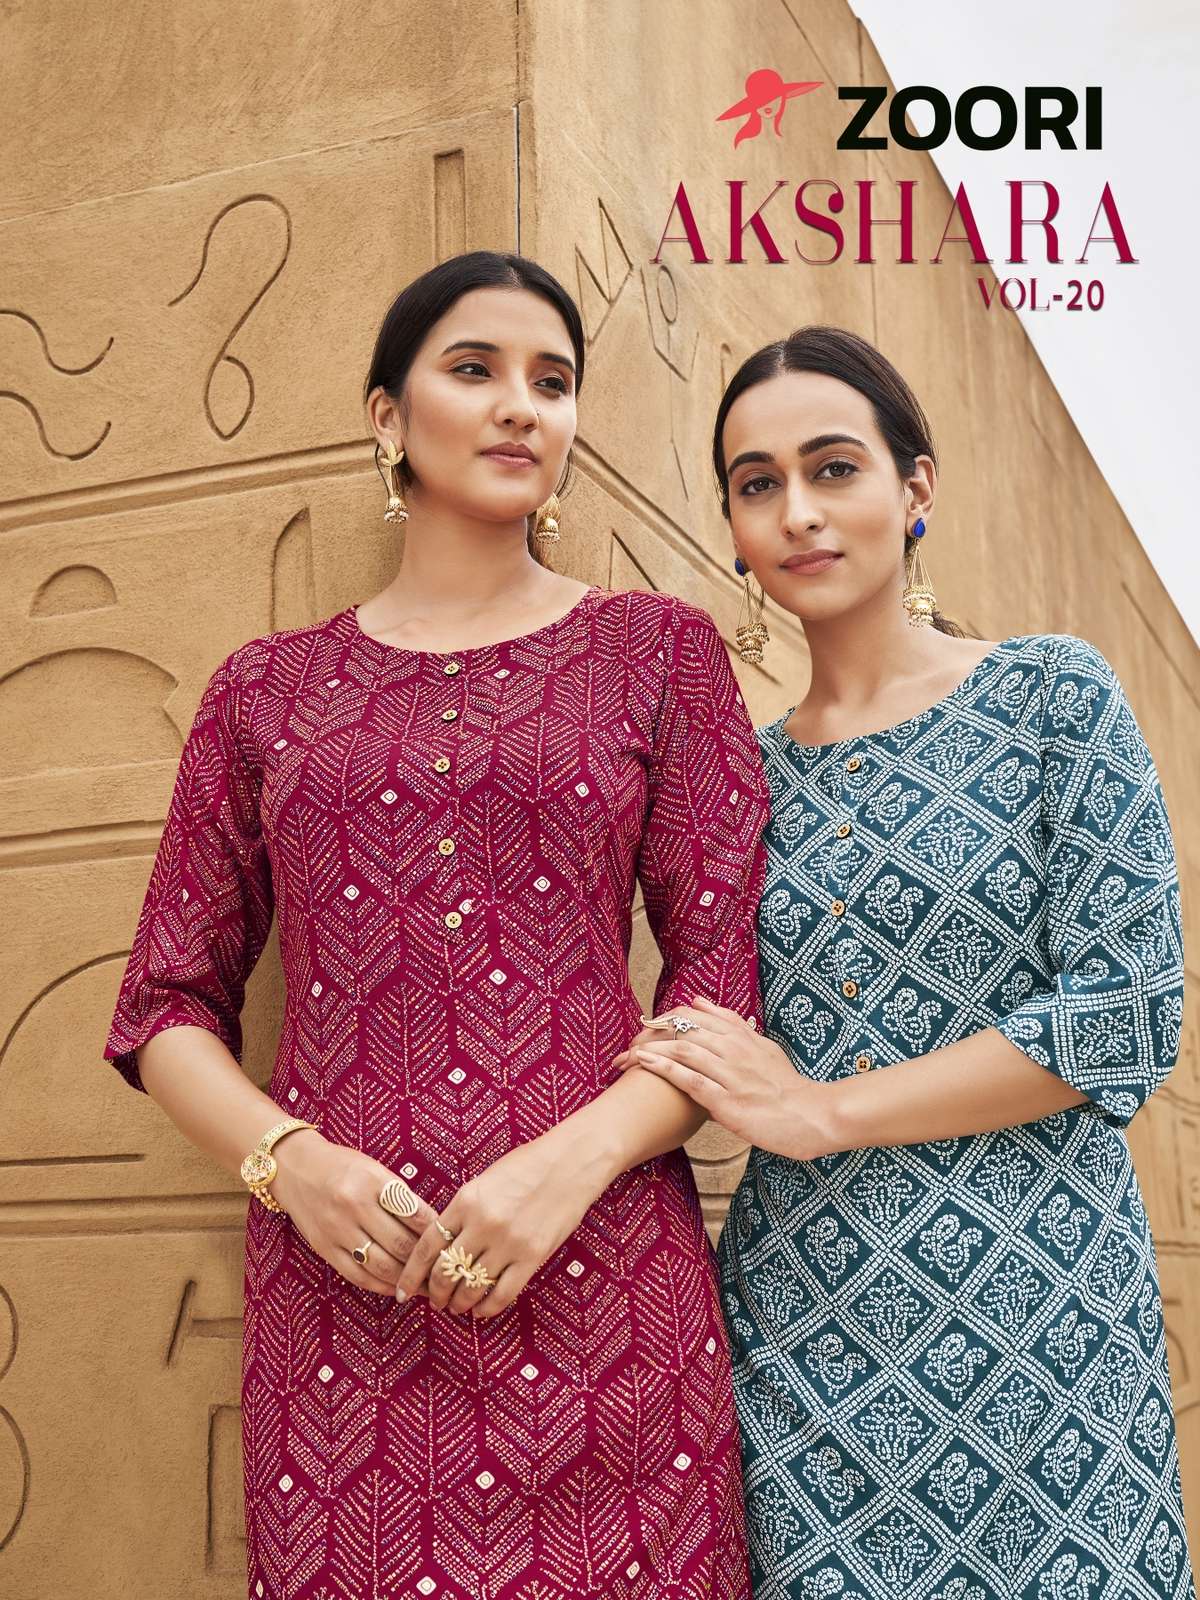 Akshara Vol-20 By Zoori 1117 To 1122 Series Designer Stylish Fancy Colorful Beautiful Party Wear & Ethnic Wear Collection Rayon Print Kurtis At Wholesale Price